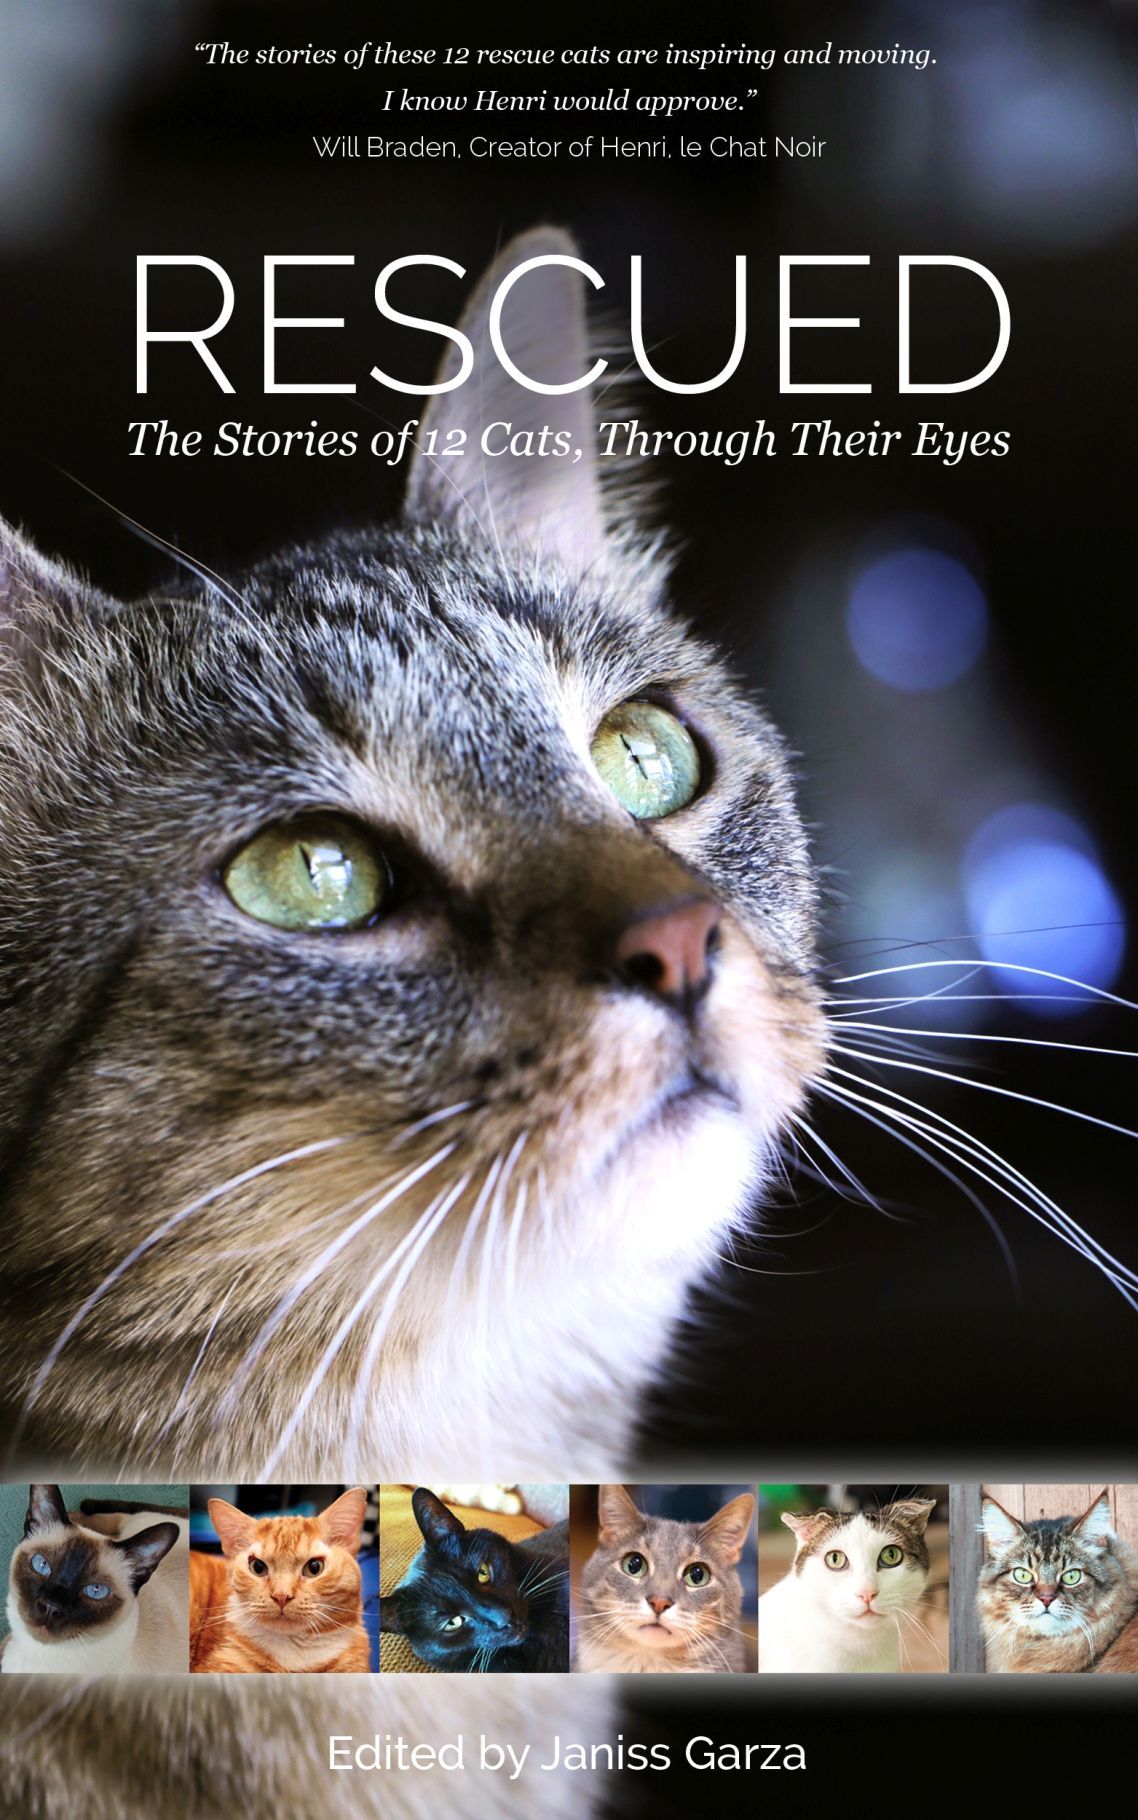 Book about rescued cats to benefit Tucson nokill shelter